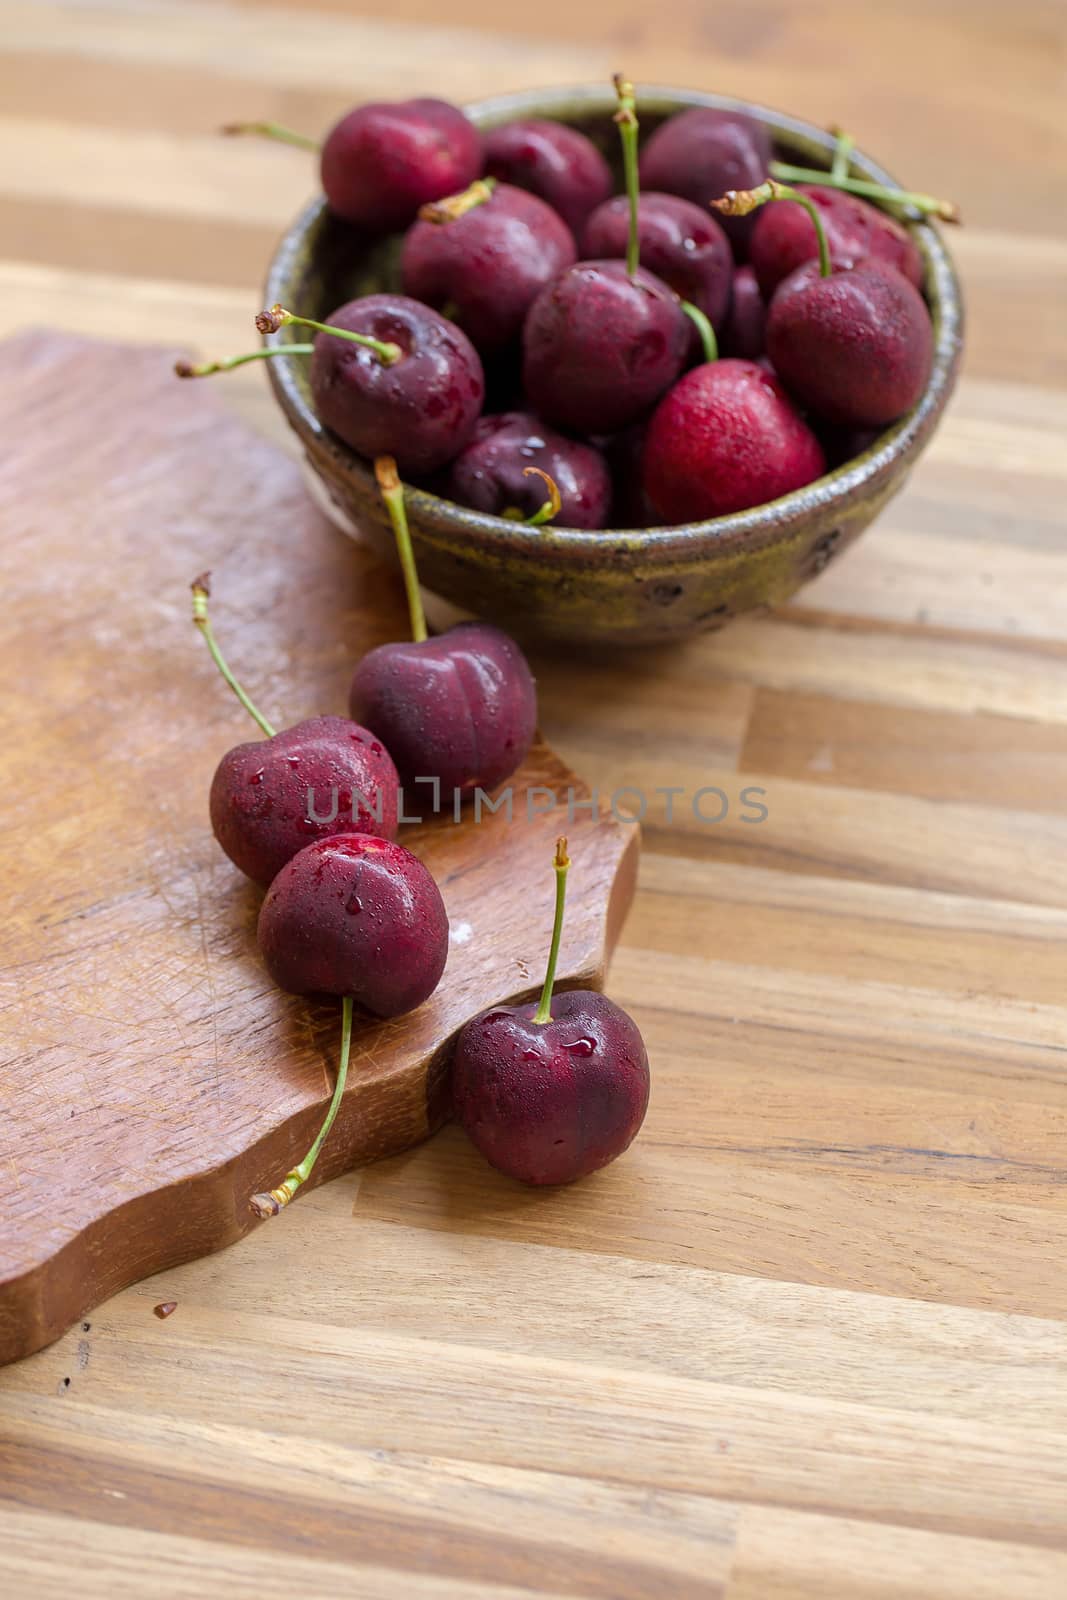 Bowl of Cherries. Red cherries in a bowl on wooden background.